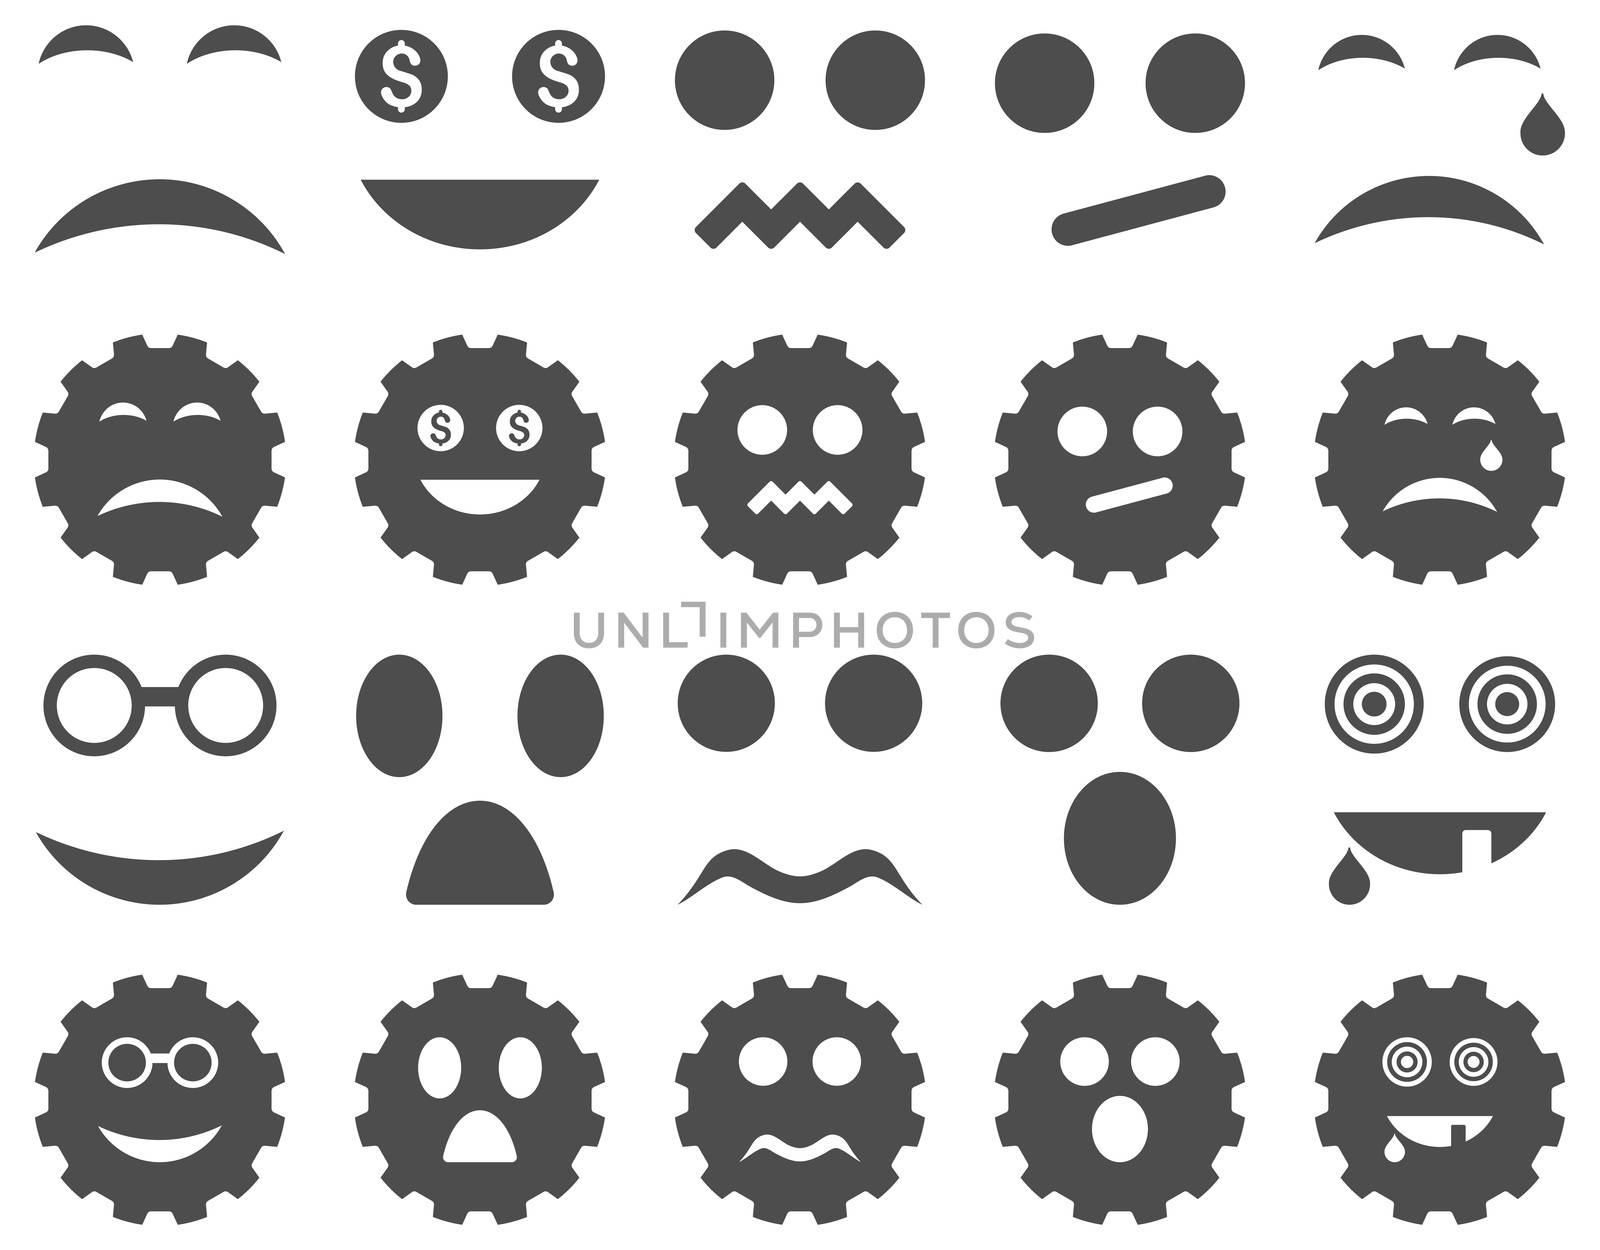 Tool, gear, smile, emotion icons. Glyph set style is flat images, gray symbols, isolated on a white background.